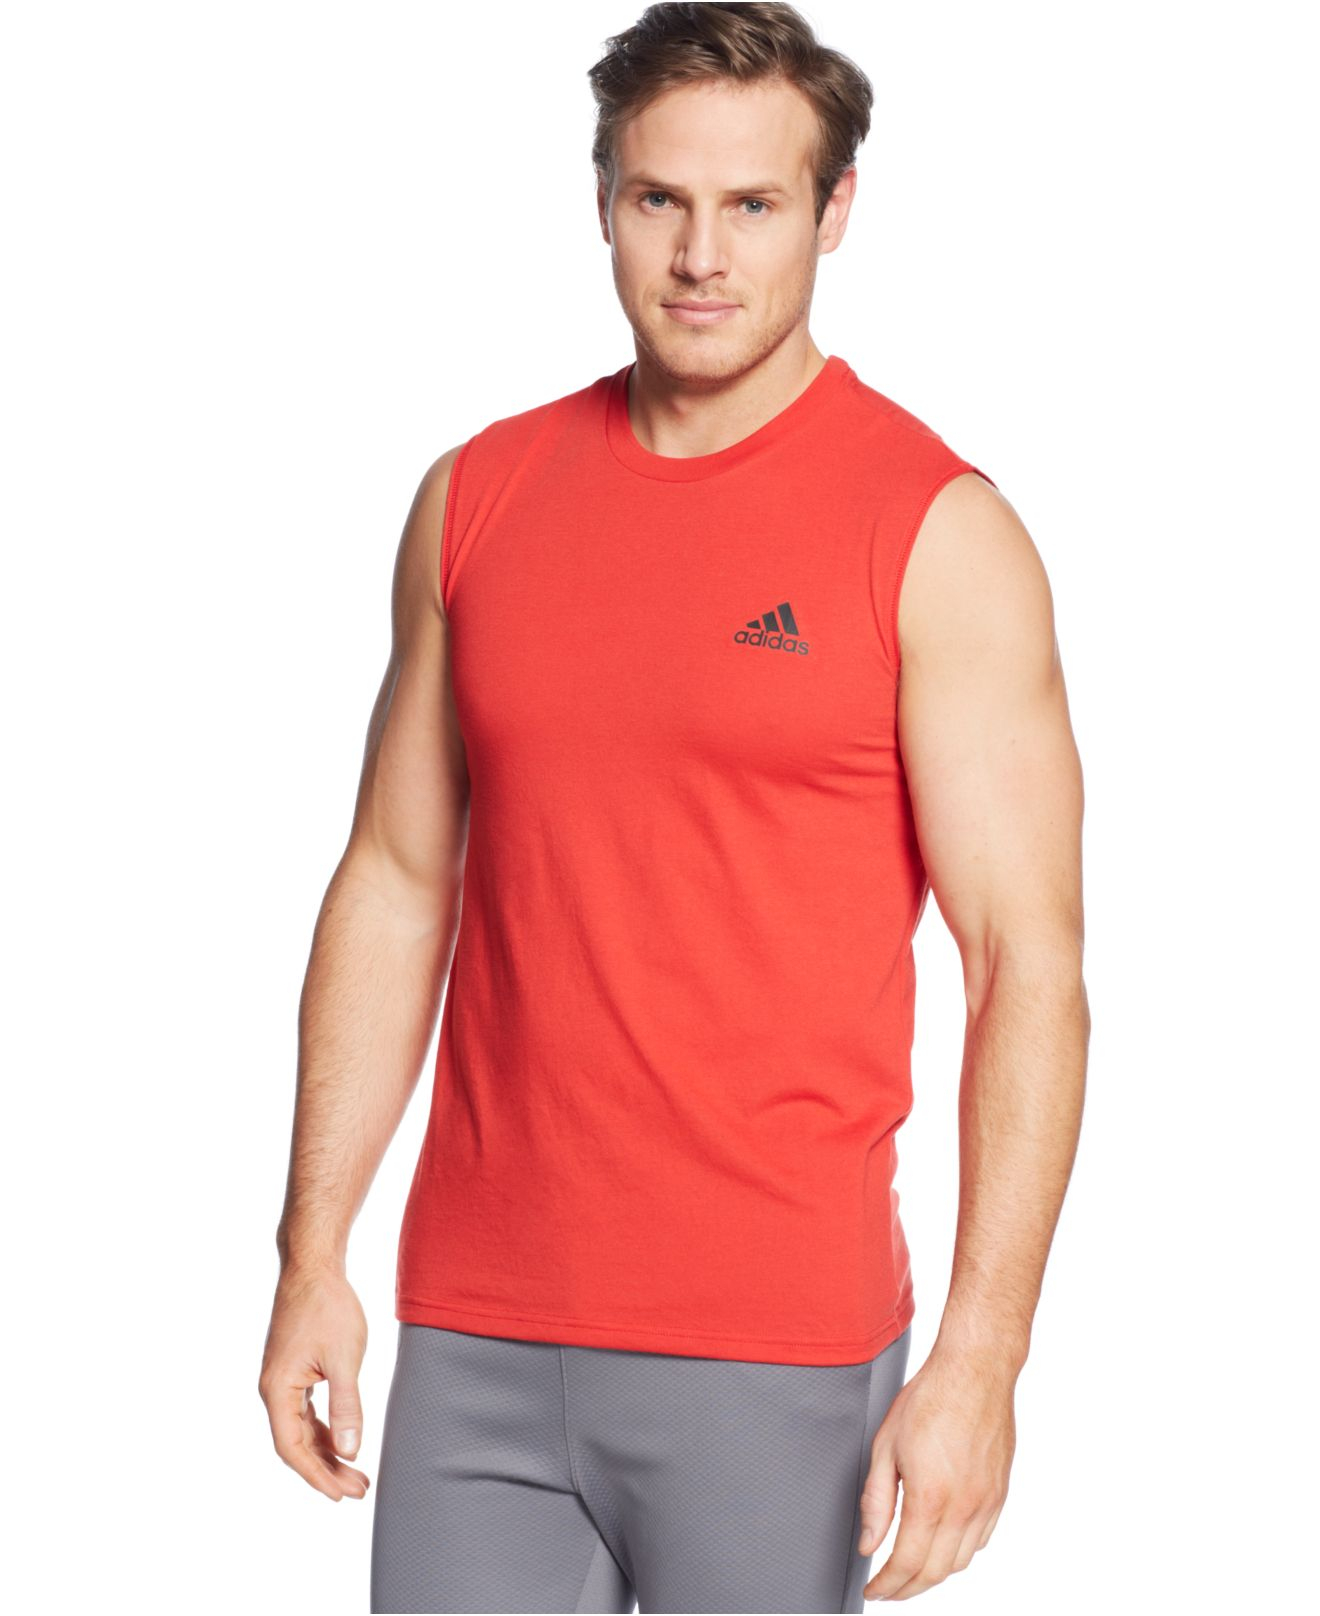 Lyst - Adidas Men's Go-to Performance Sleeveless T-shirt in Red for Men